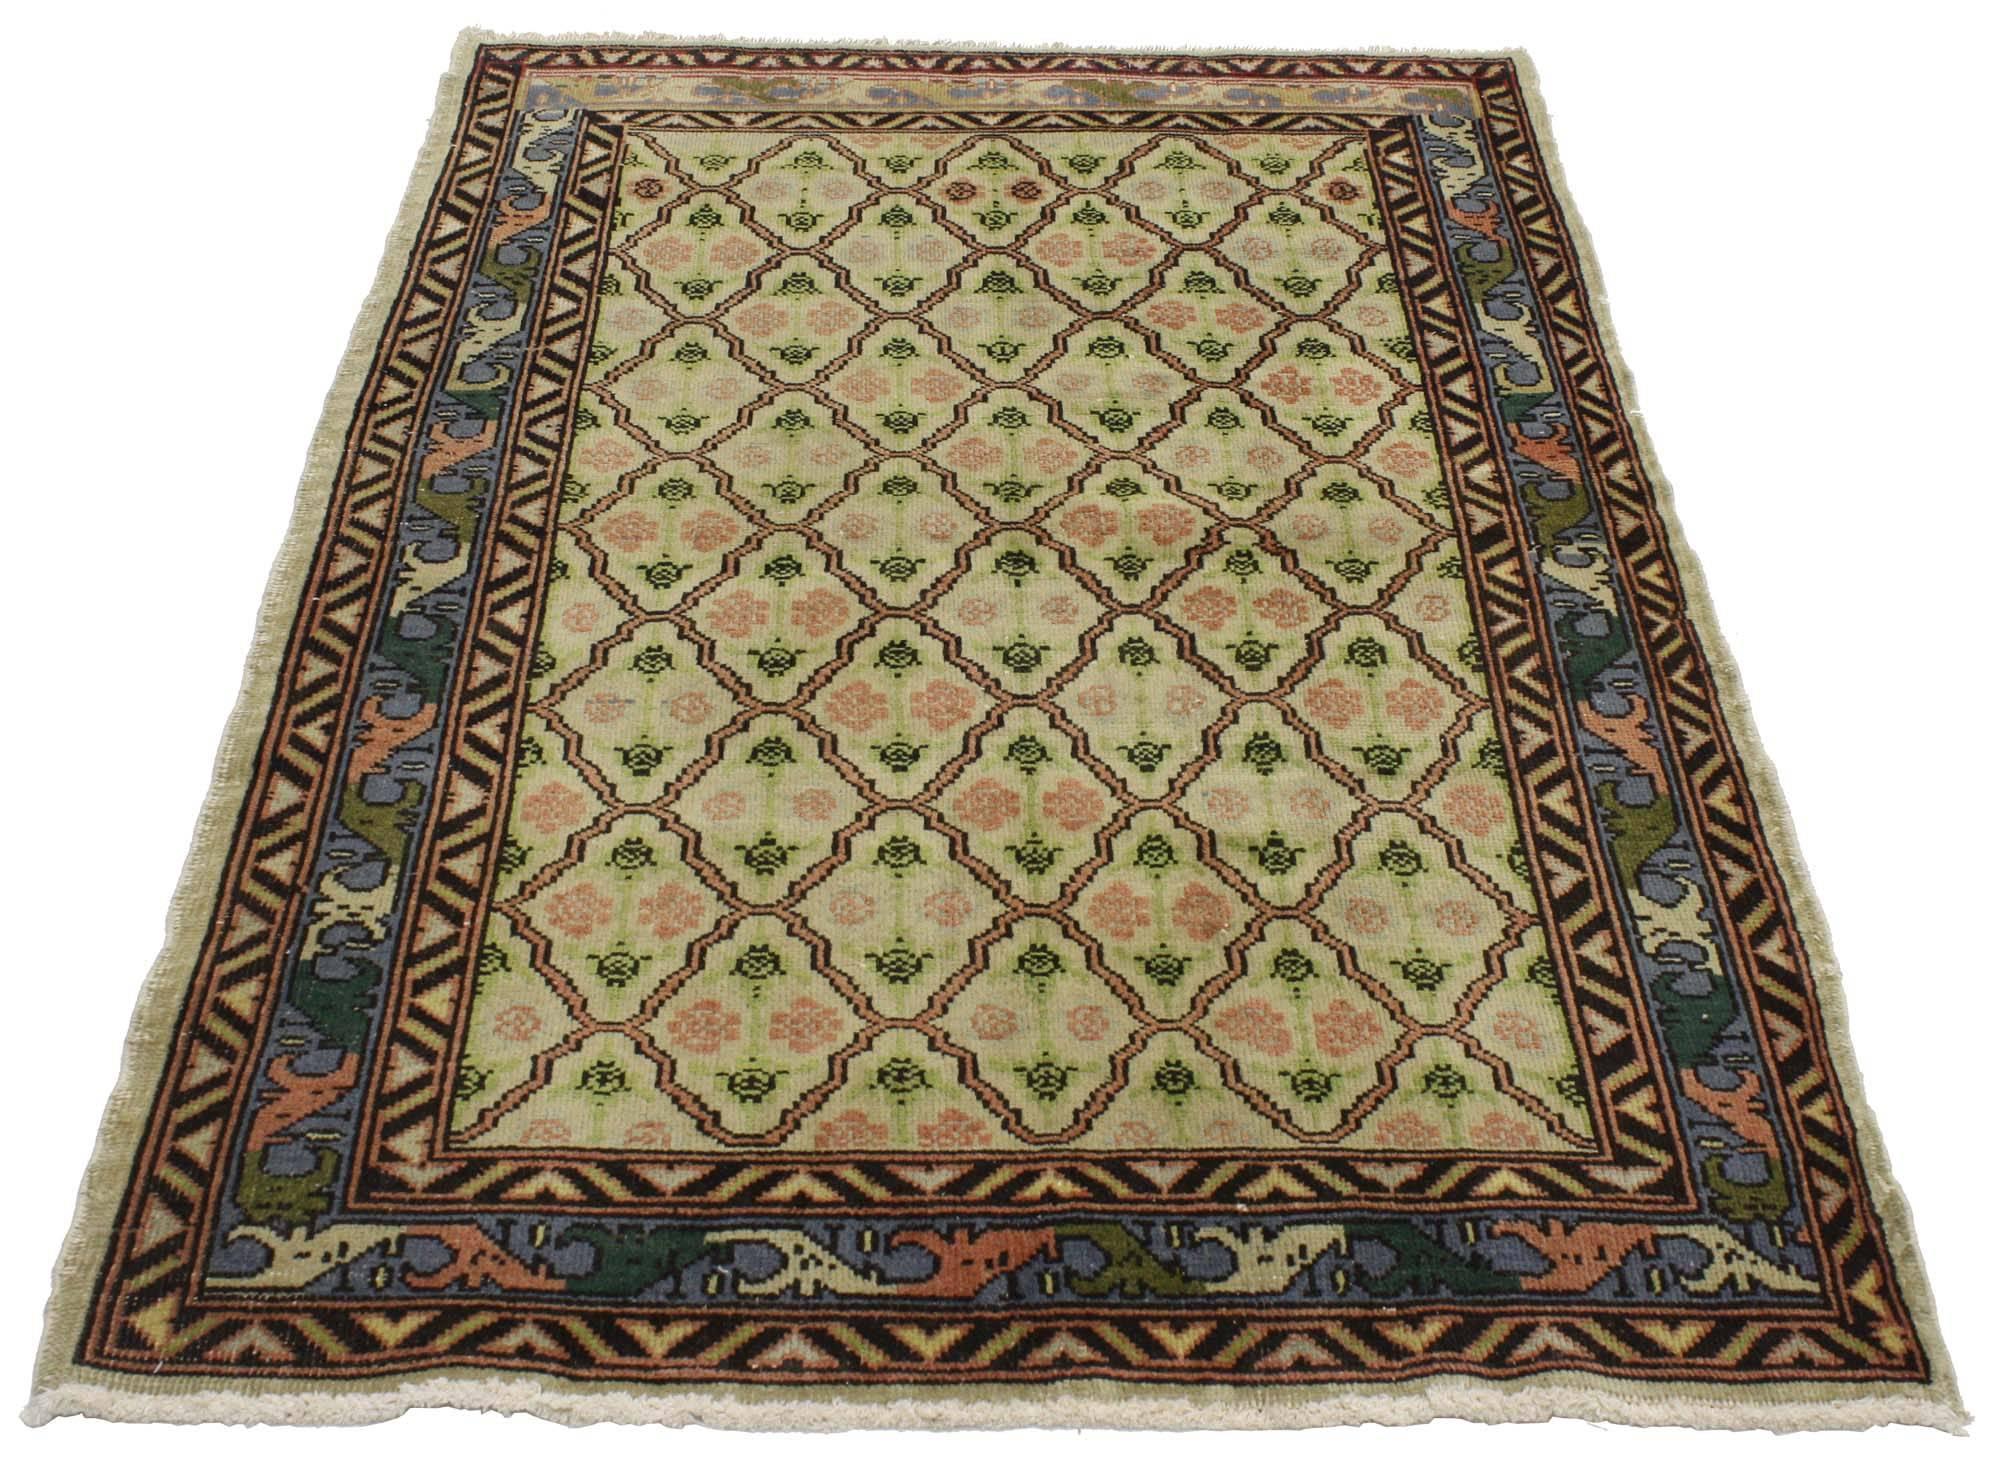 51897, Distressed Vintage Turkish Sivas Rug with Romantic Industrial Art Deco Style. This hand knotted wool distressed vintage Turkish Sivas rug with romantic Industrial style features a floral lattice pattern composed of scalloped diamonds in